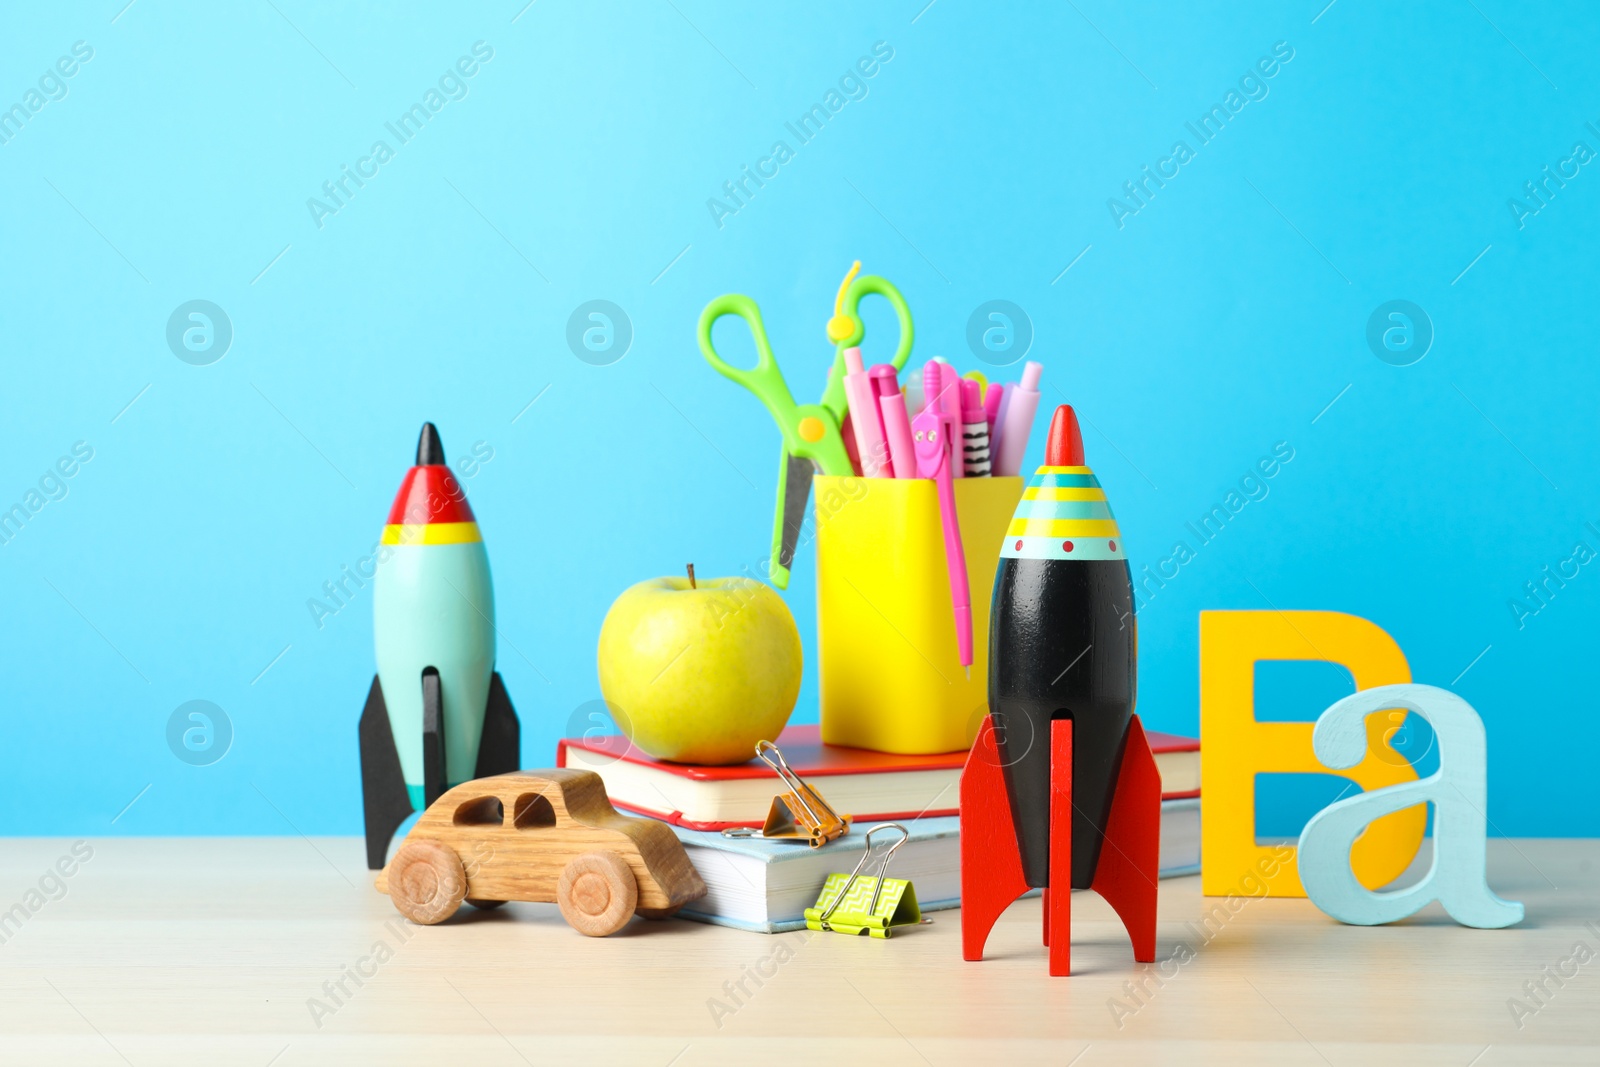 Photo of Bright toy rockets, car and school supplies on wooden table